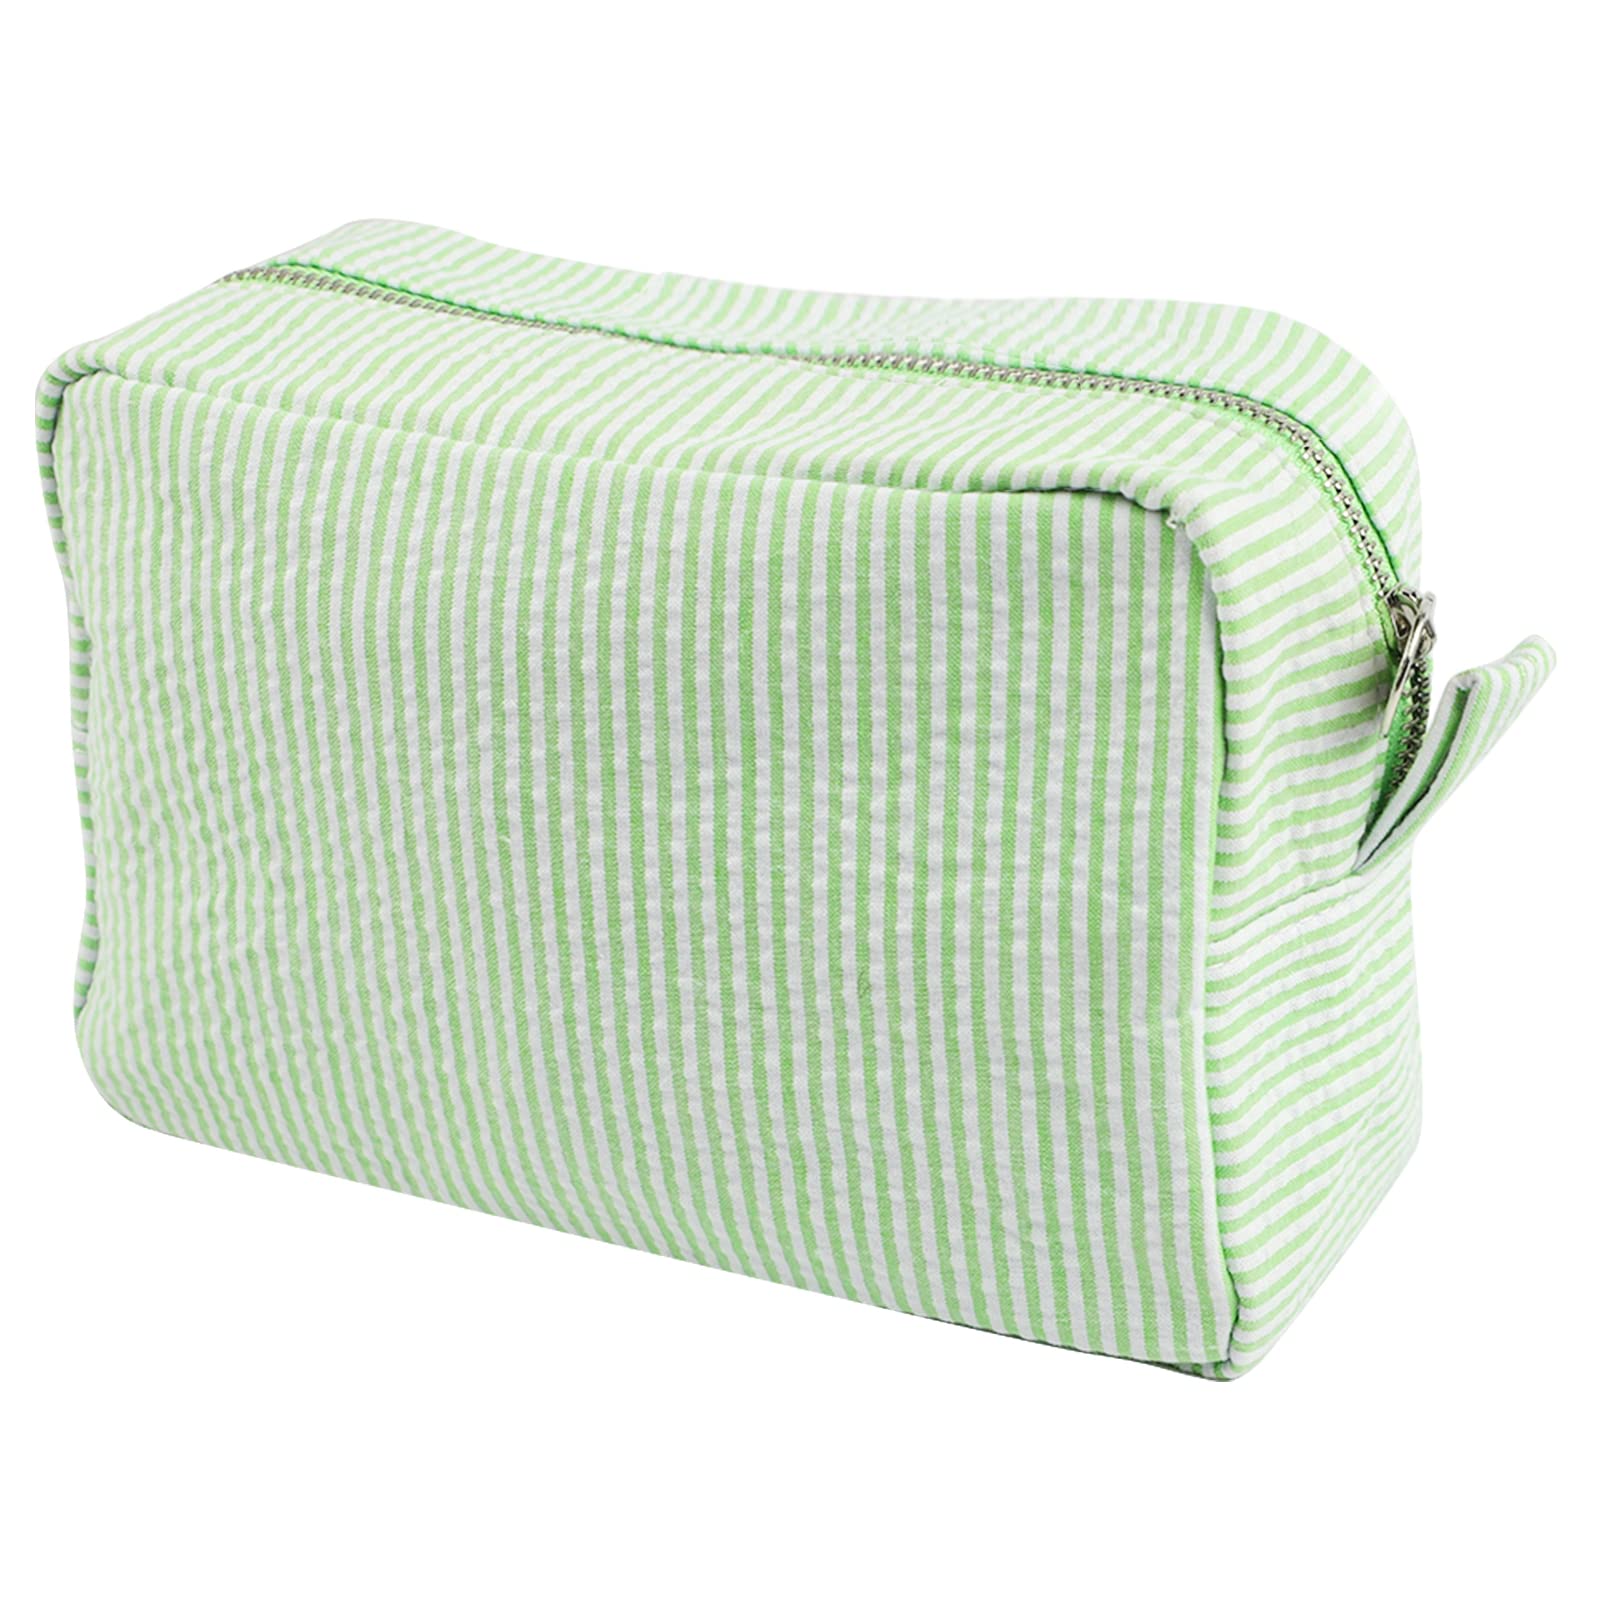 Terry Cloth Makeup Bag, Cute Cosmetic Pouch, Aesthetic Pastel Travel Organizer for Accessories, Toiletries (Pastel Green)